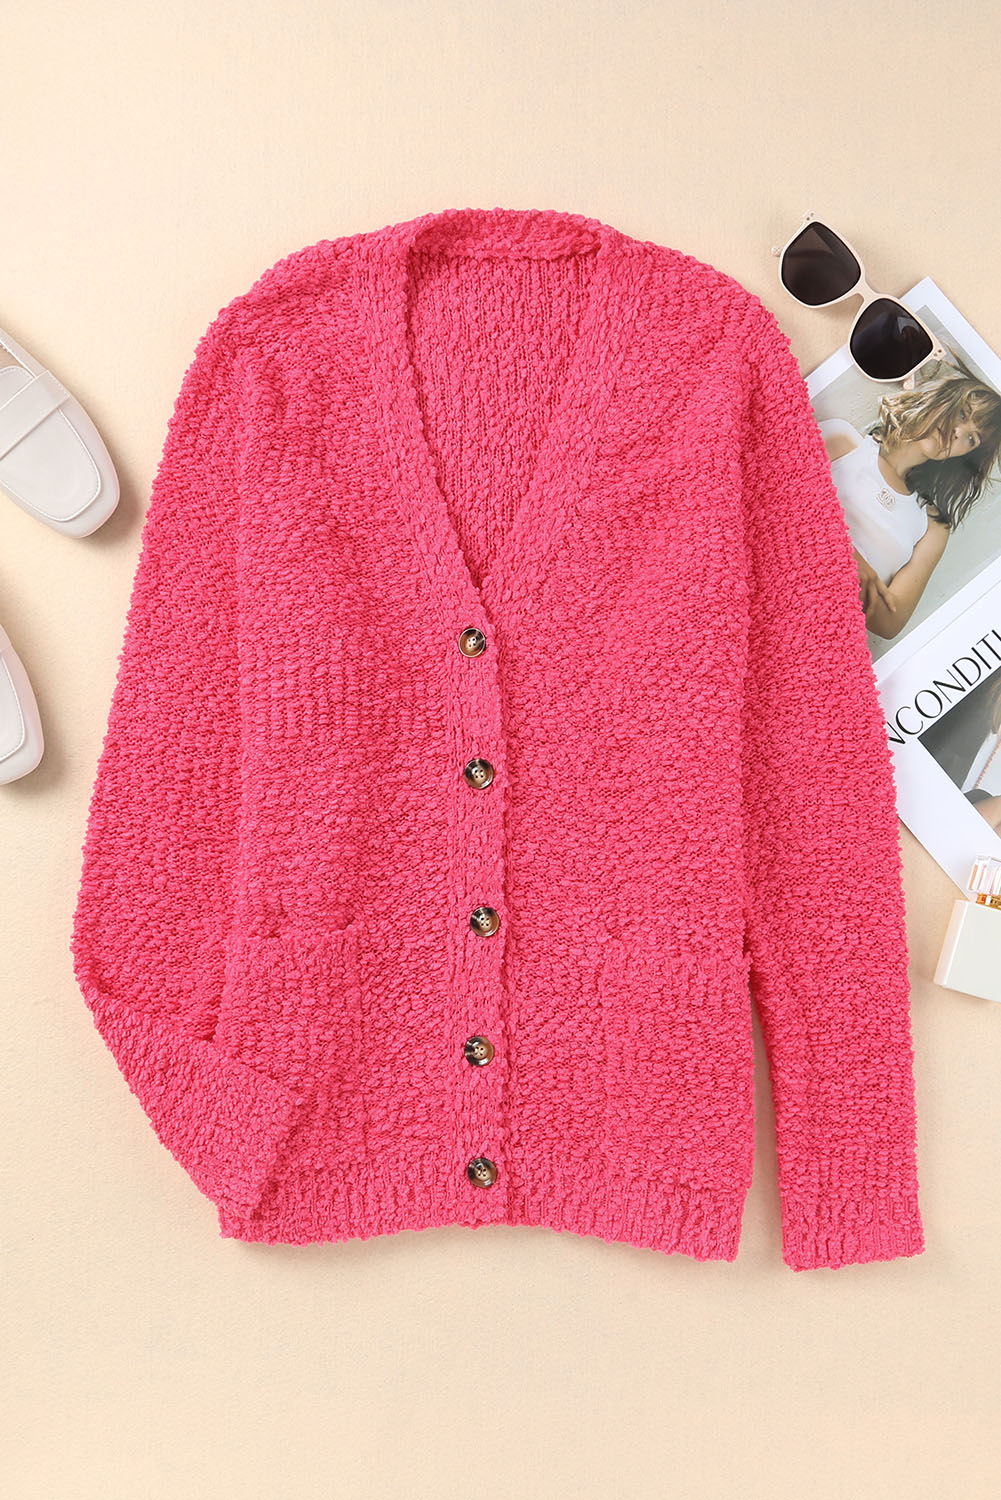 Red Plus Size Popcorn Buttons Cardigan